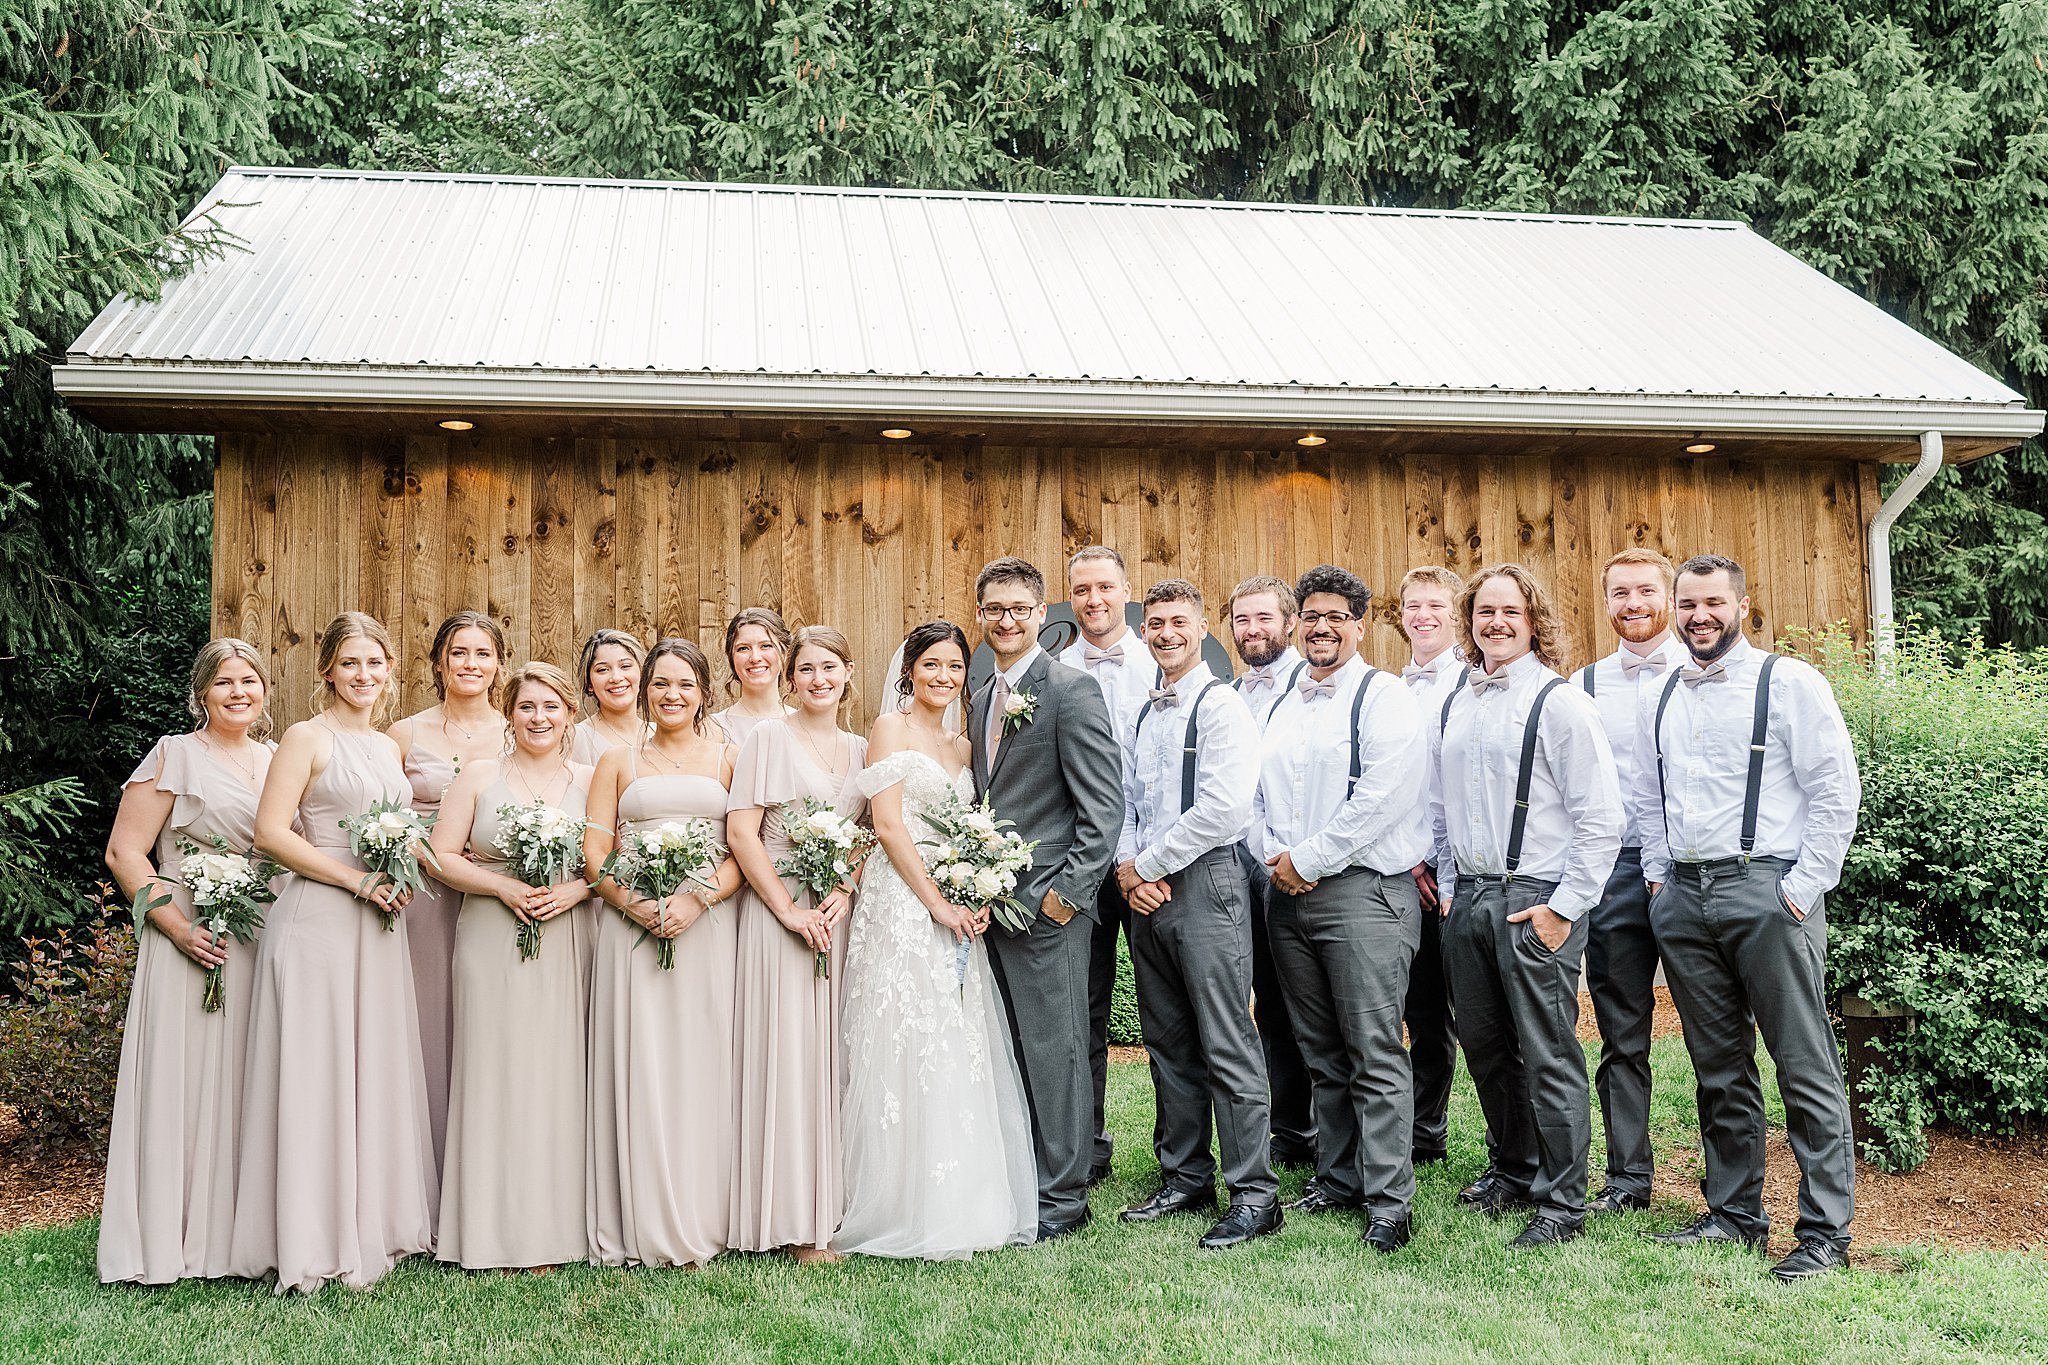 Wind in the Willows Grantville PA Spring Wedding Photography_5005.jpg